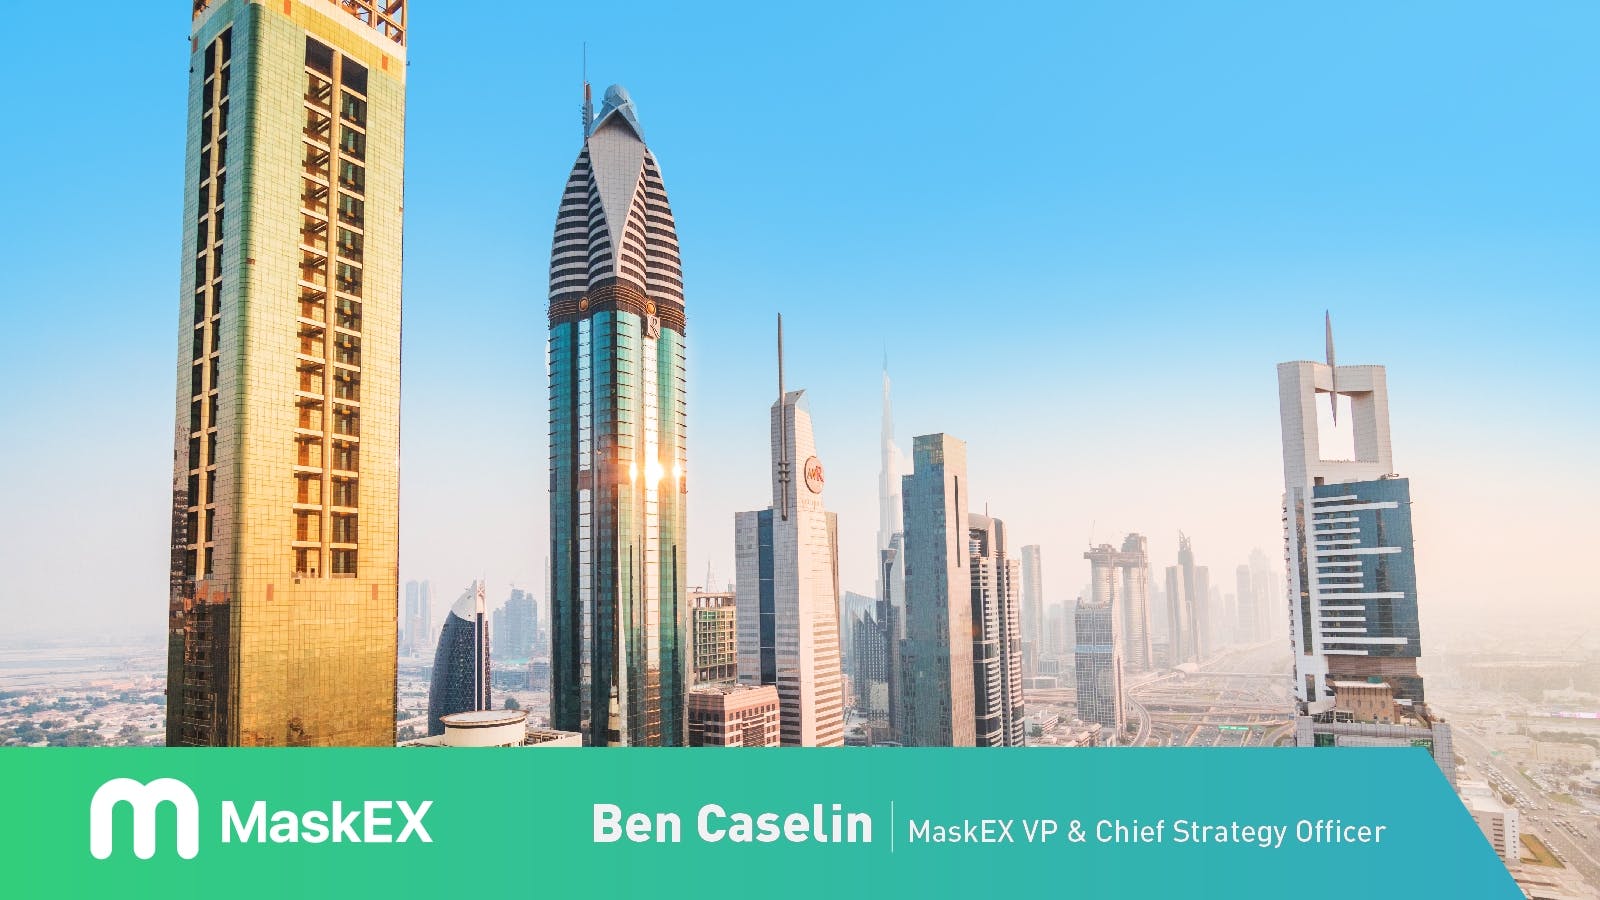 An Interview with Ben Caselin, Vice President & Chief Strategy Officer at MaskEX